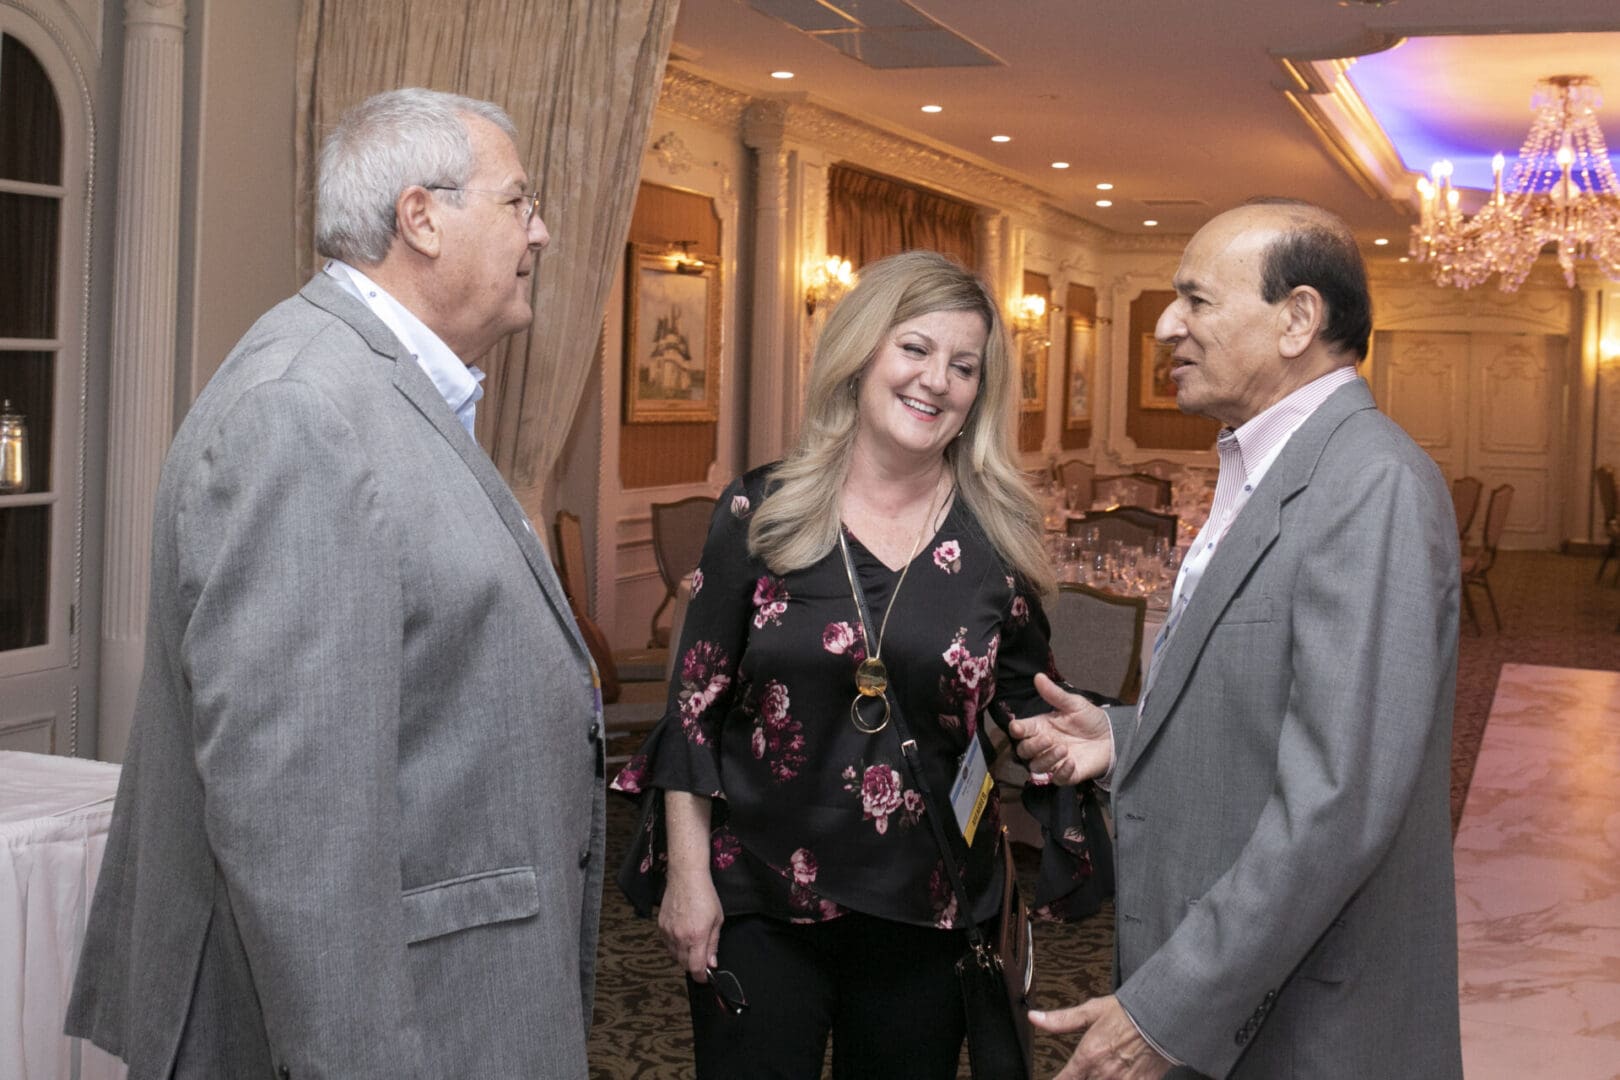 Two men and a woman talking at an event.